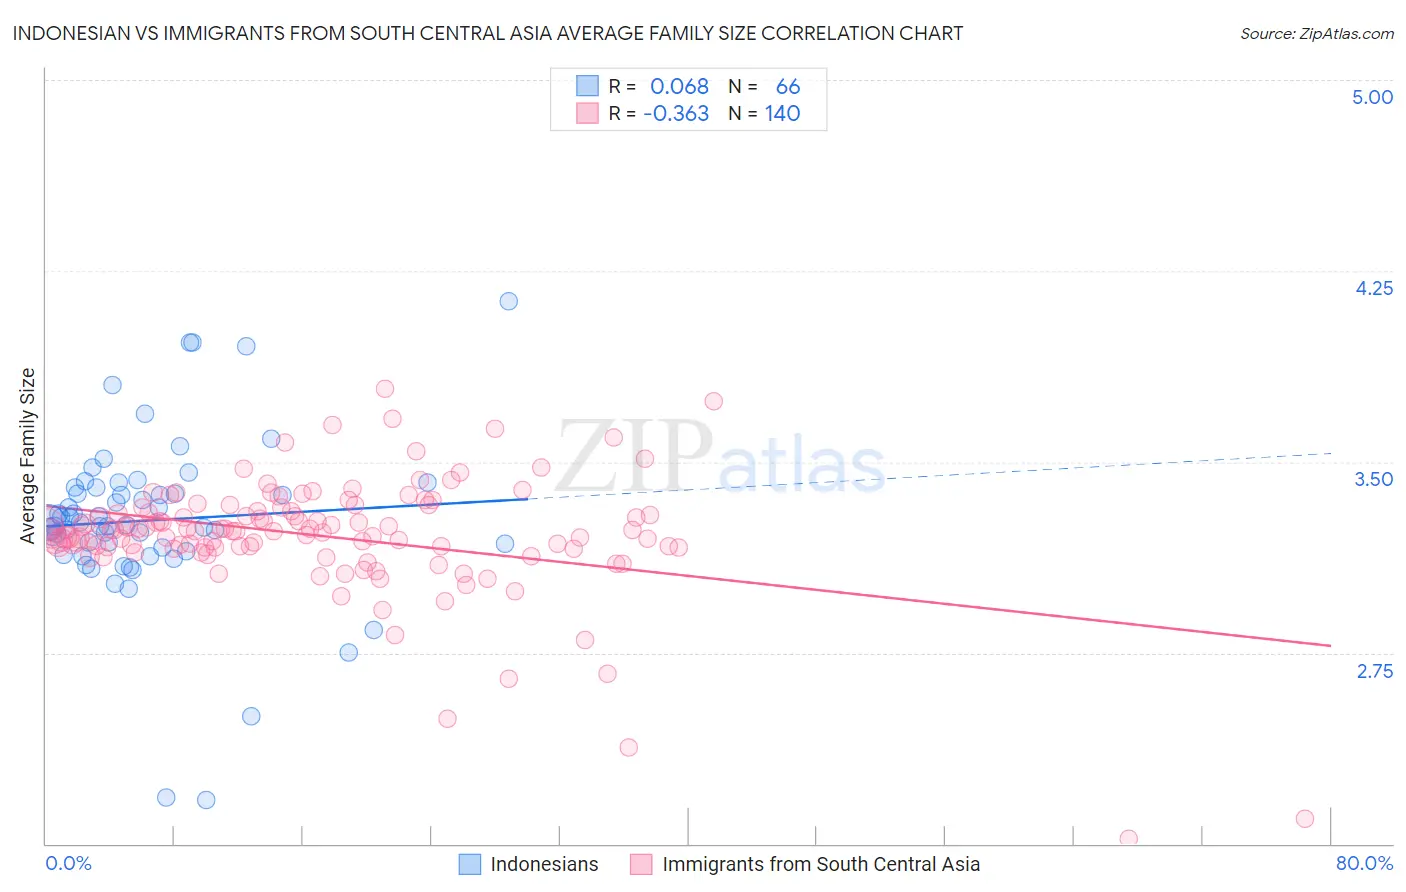 Indonesian vs Immigrants from South Central Asia Average Family Size